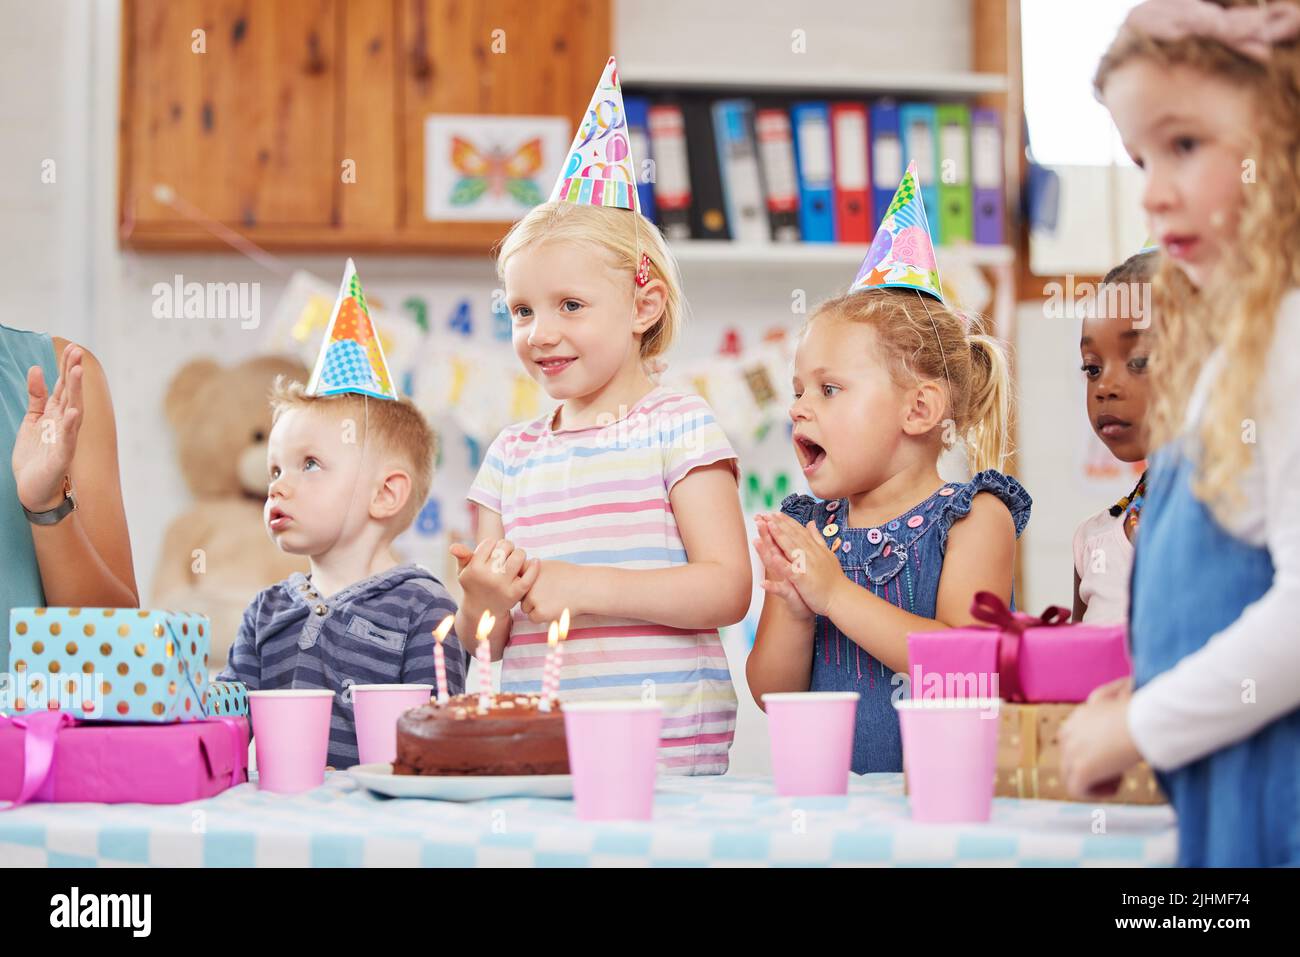 Everyone loves class parties. a preschool children celebrating a birthday in class. Stock Photo